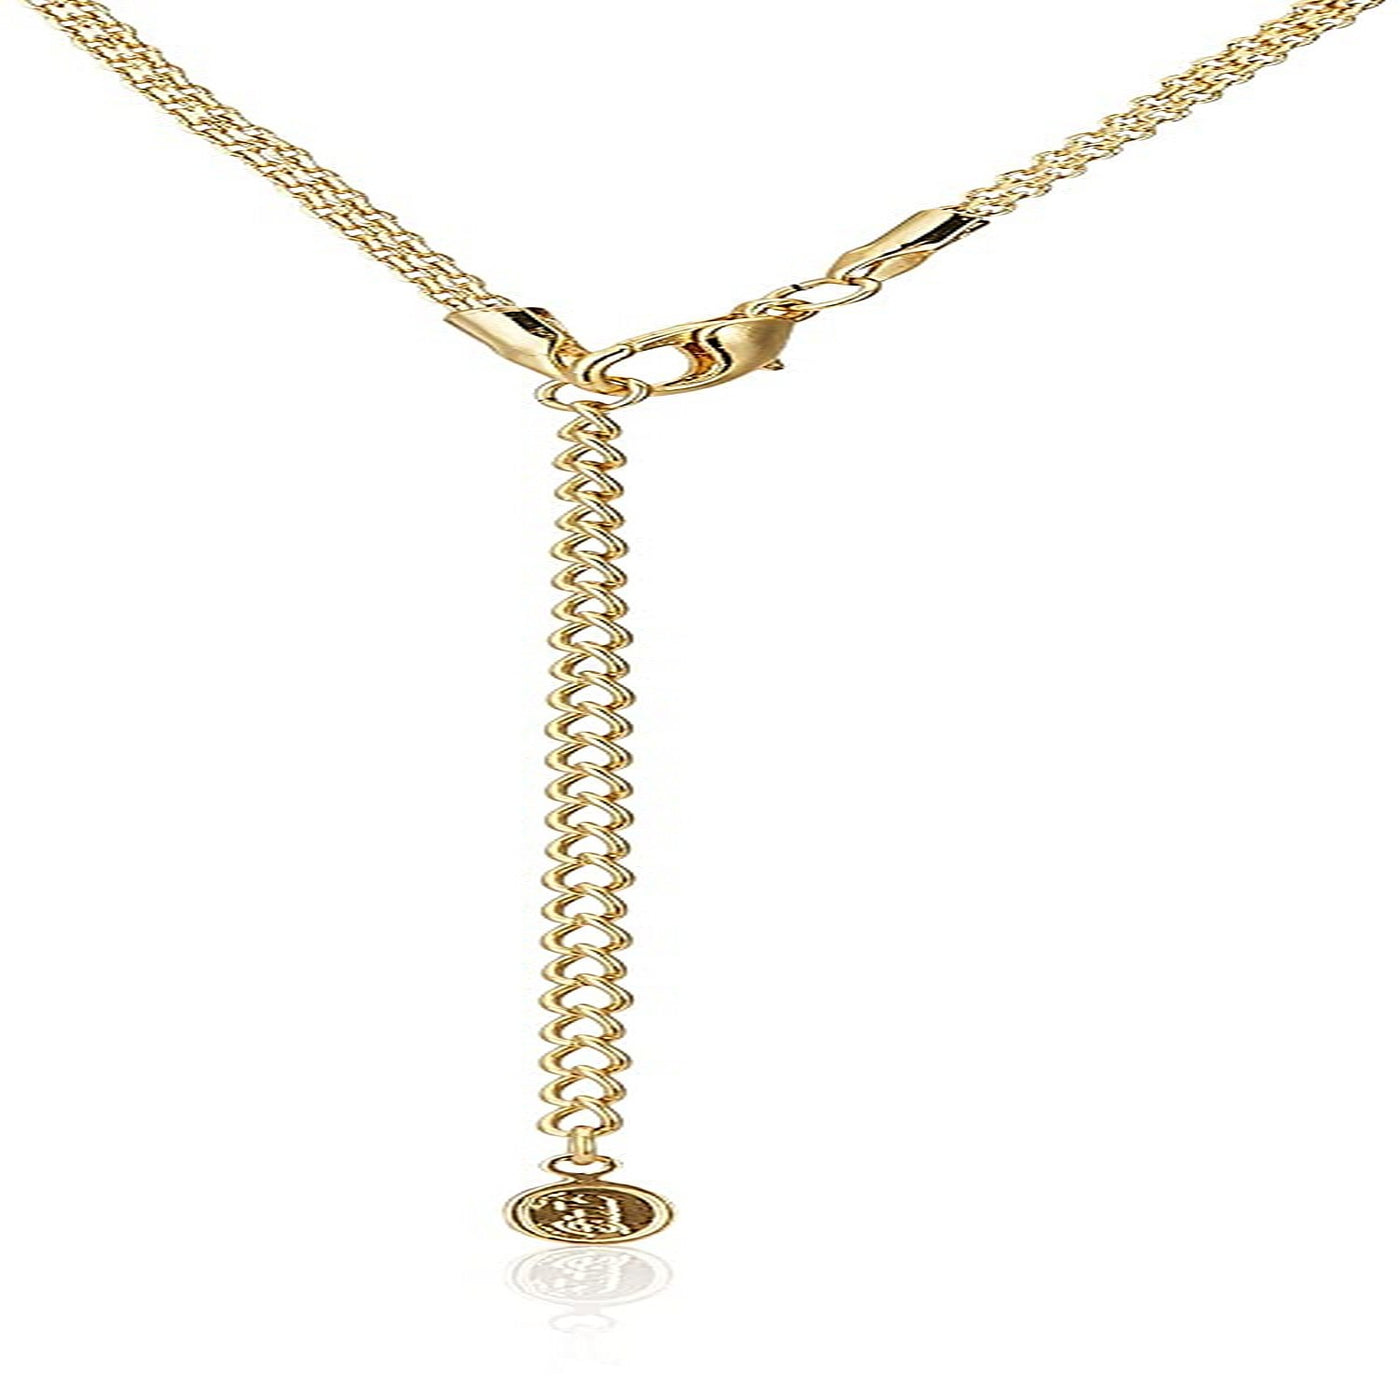 Estele 24 Kt Gold Plated and Rhodium Plated American Diamond Flower Necklace Set for Women